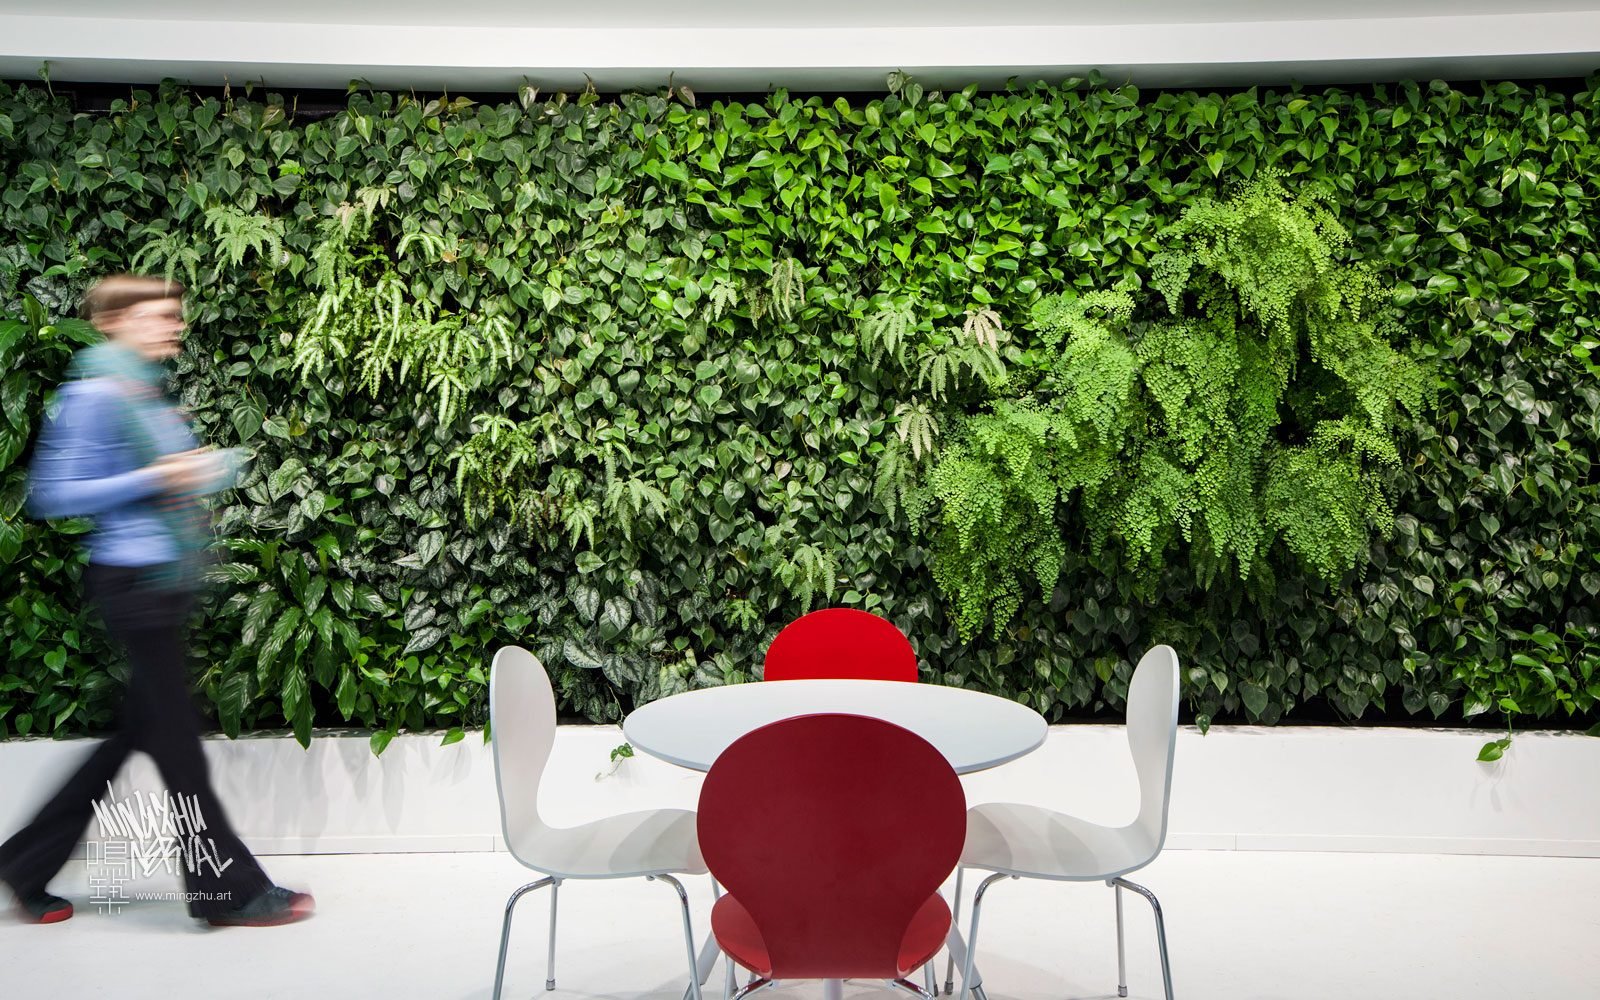 At Mingzhu Nerval, we thrive at creating the most beautiful vertical gardens in the world. For H&M, we created a classy living wall design - Shanghai, 2012.